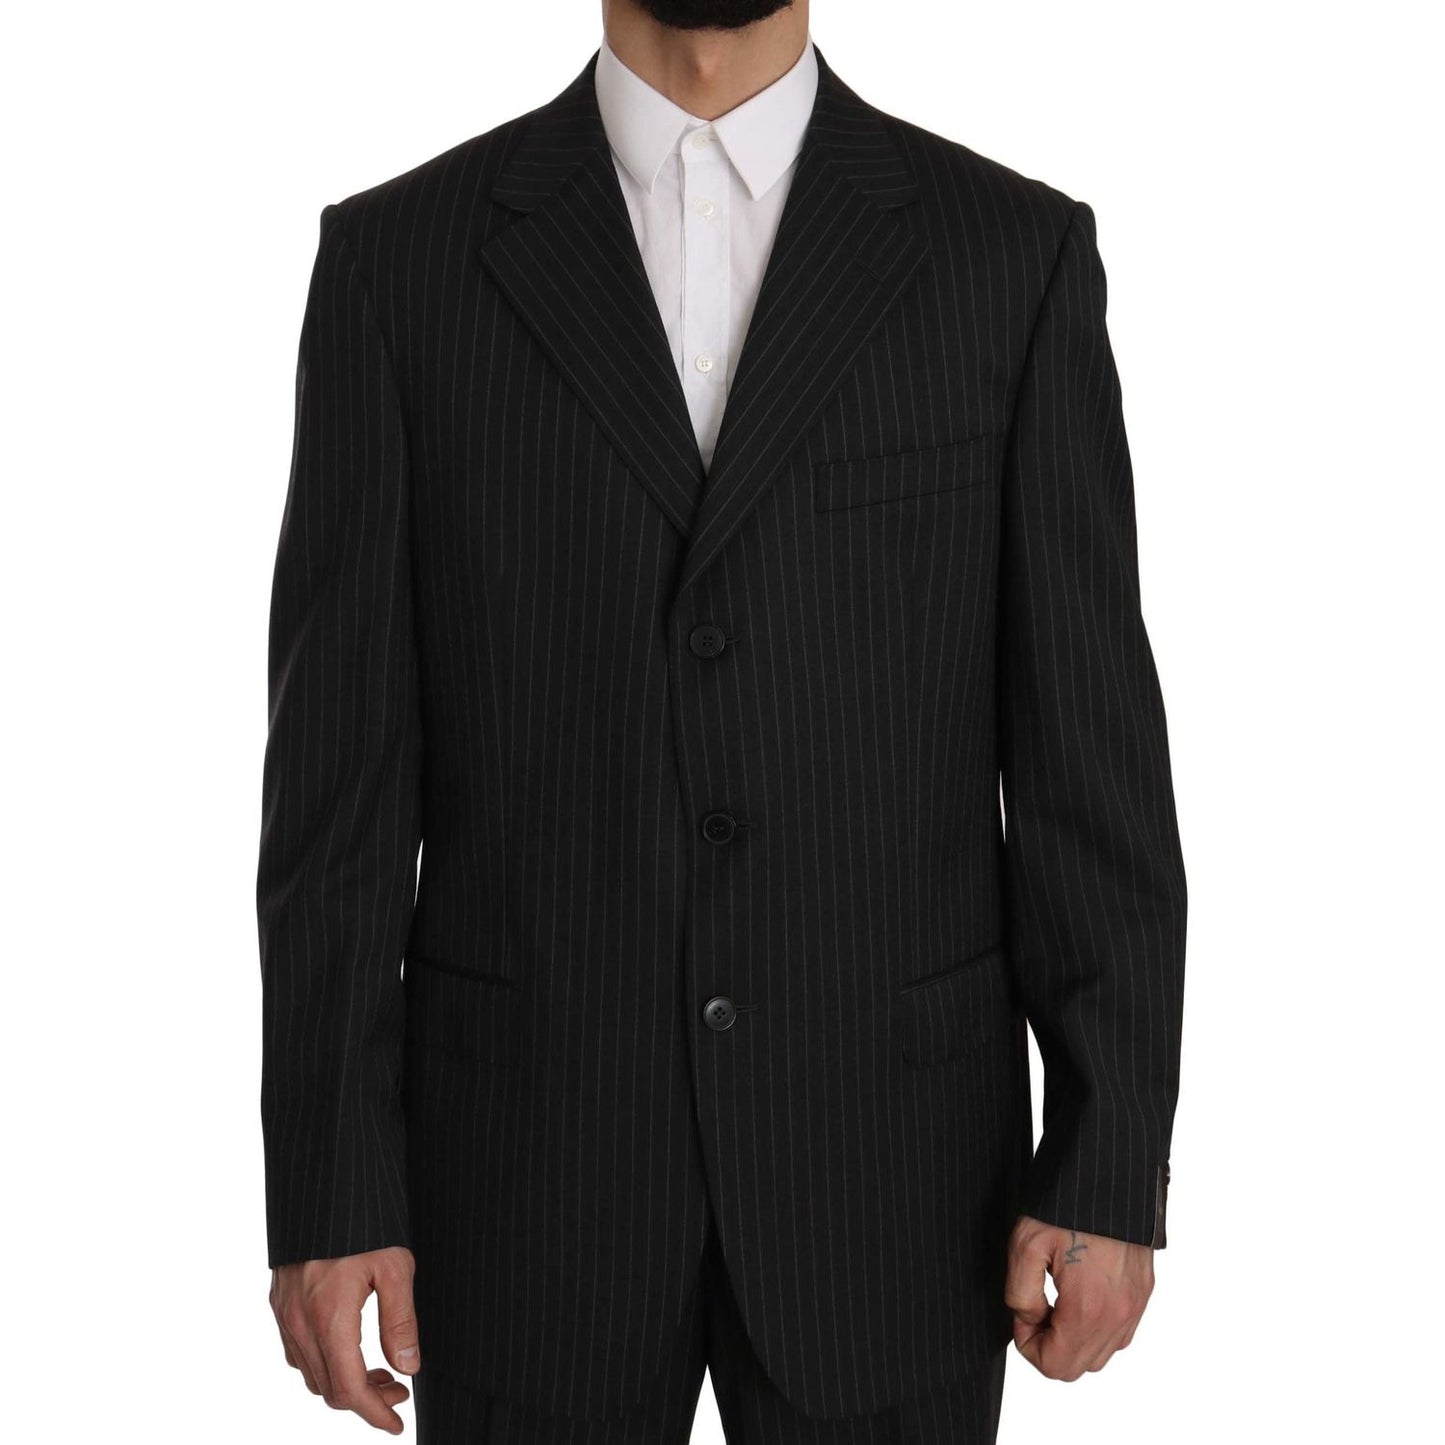 Z ZEGNA Elegant Black Striped Wool Suit black-striped-two-piece-3-button-100-wool-suit Suit IMG_7801-scaled.jpg